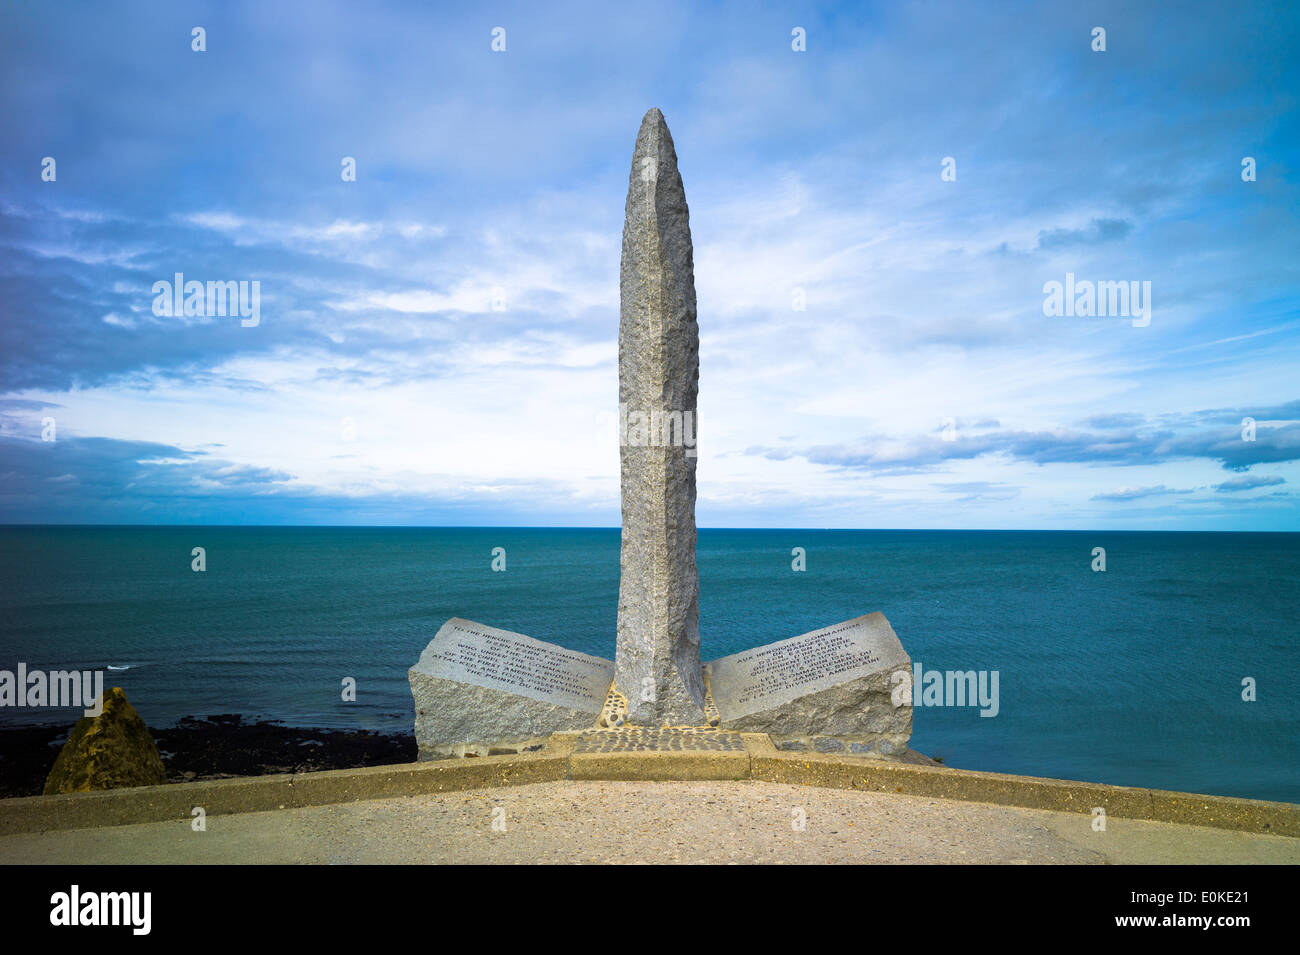 Memorial commemorating the dead of World War II at La Pointe du Hoc in Normandy, France Stock Photo